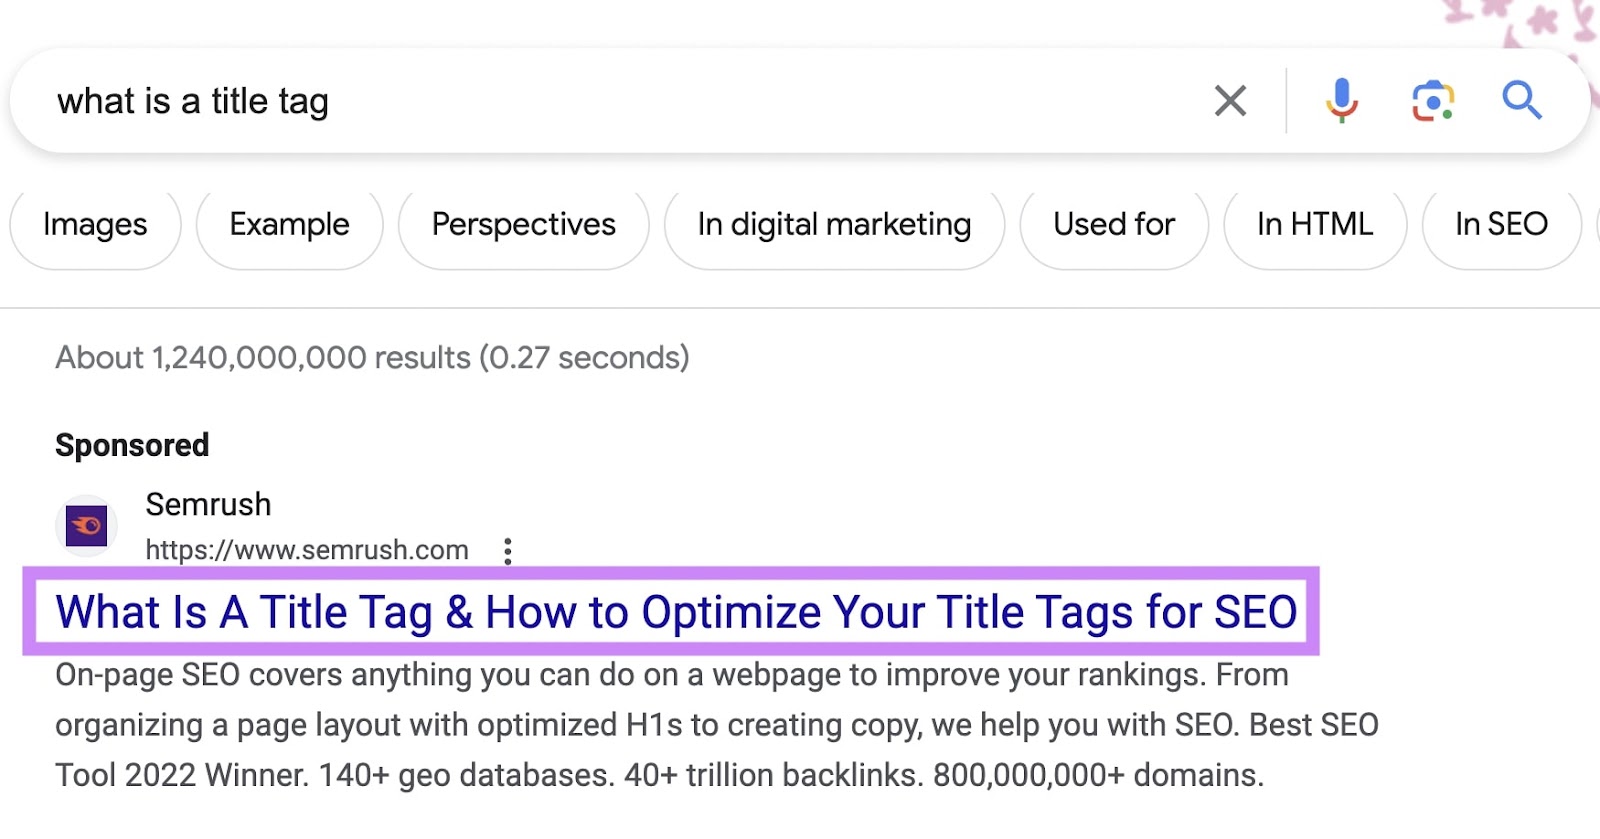 A title tag on SERP that reads "What is a title tag & how to optimize your title tags for SEO"